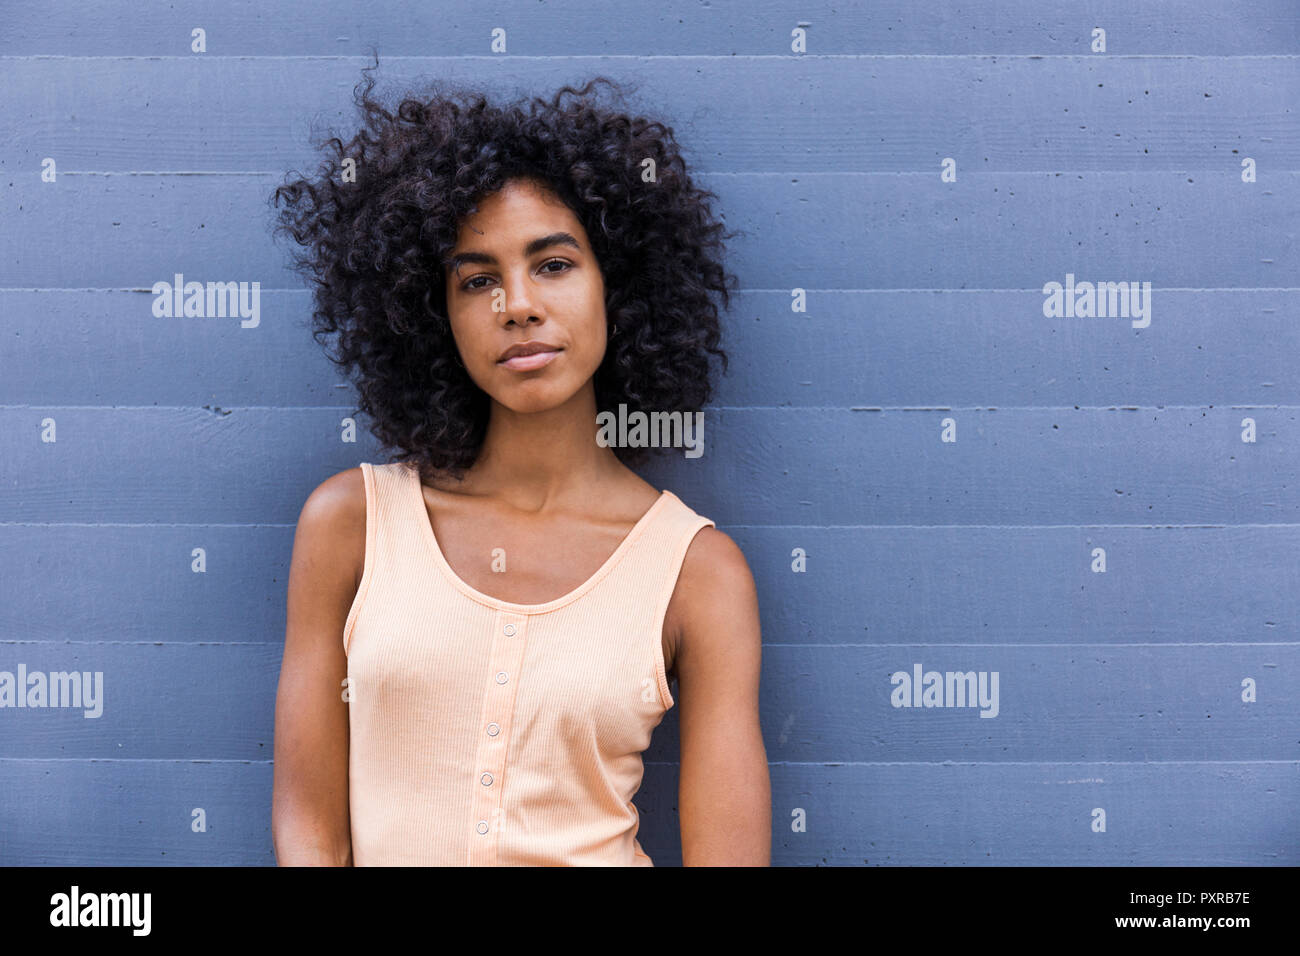 Portrait of young woman with curly black hair Stock Photo